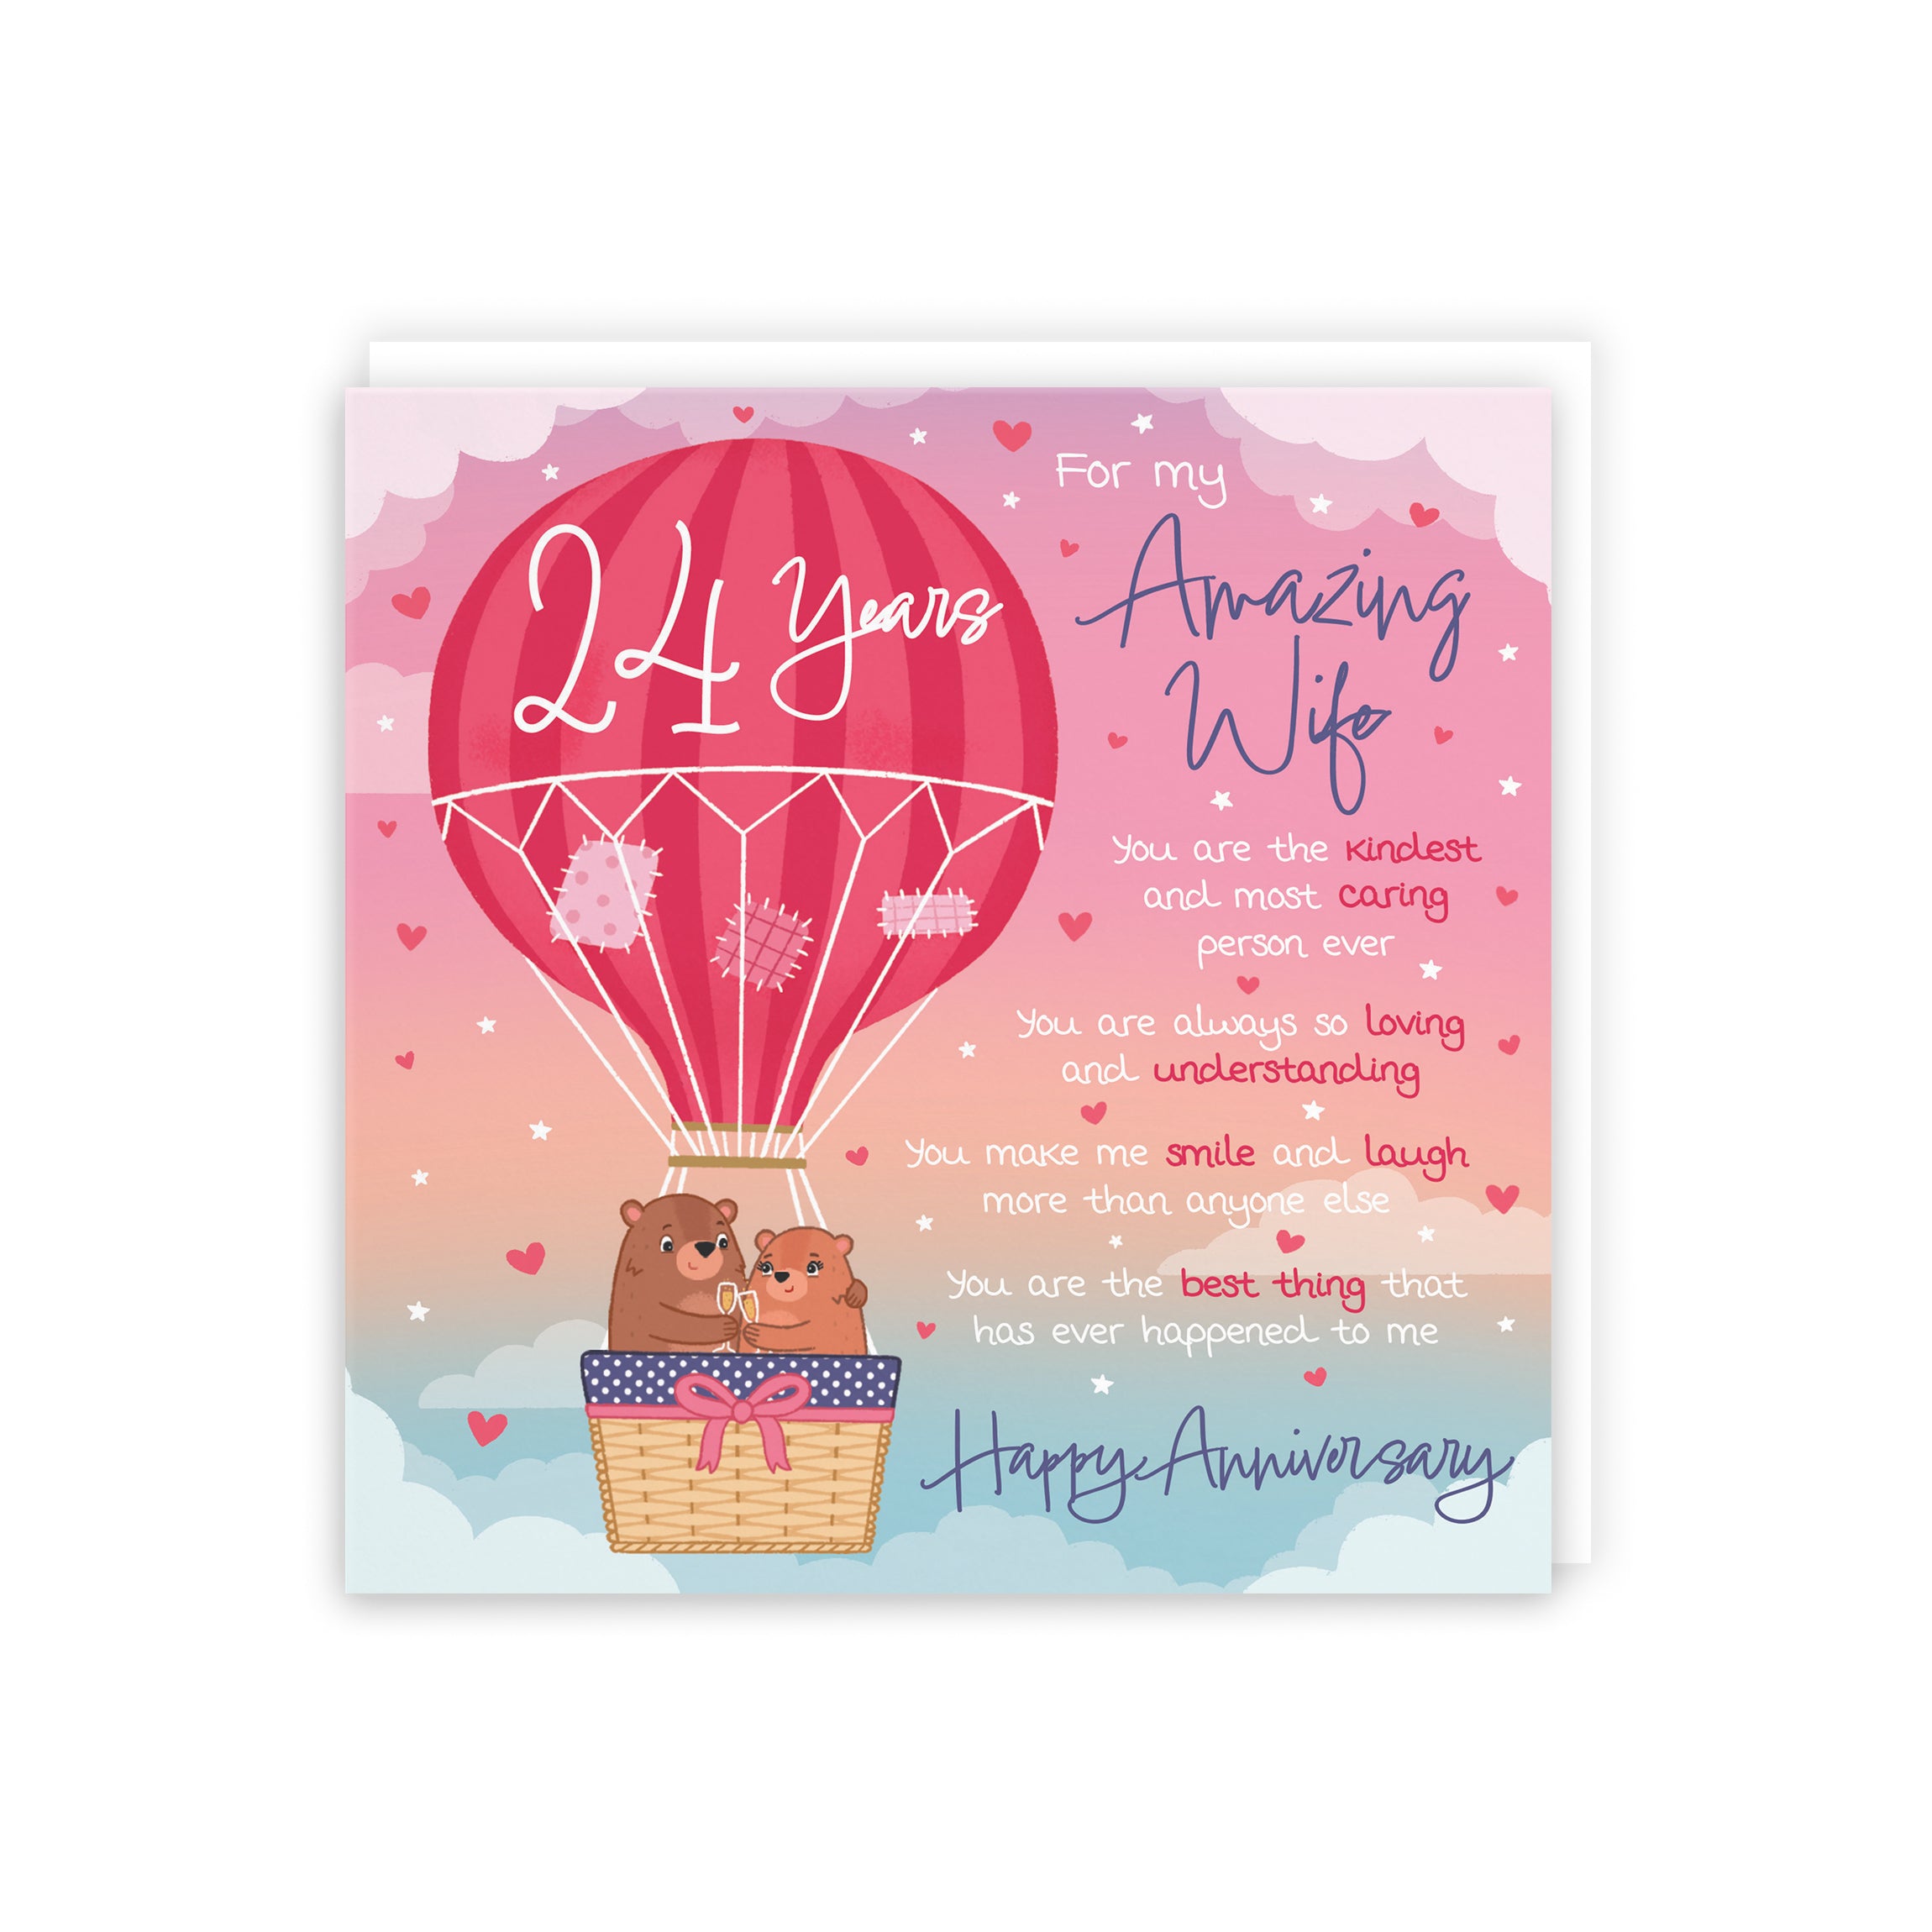 Wife 24th Anniversary Poem Card Love Is In The Air Cute Bears